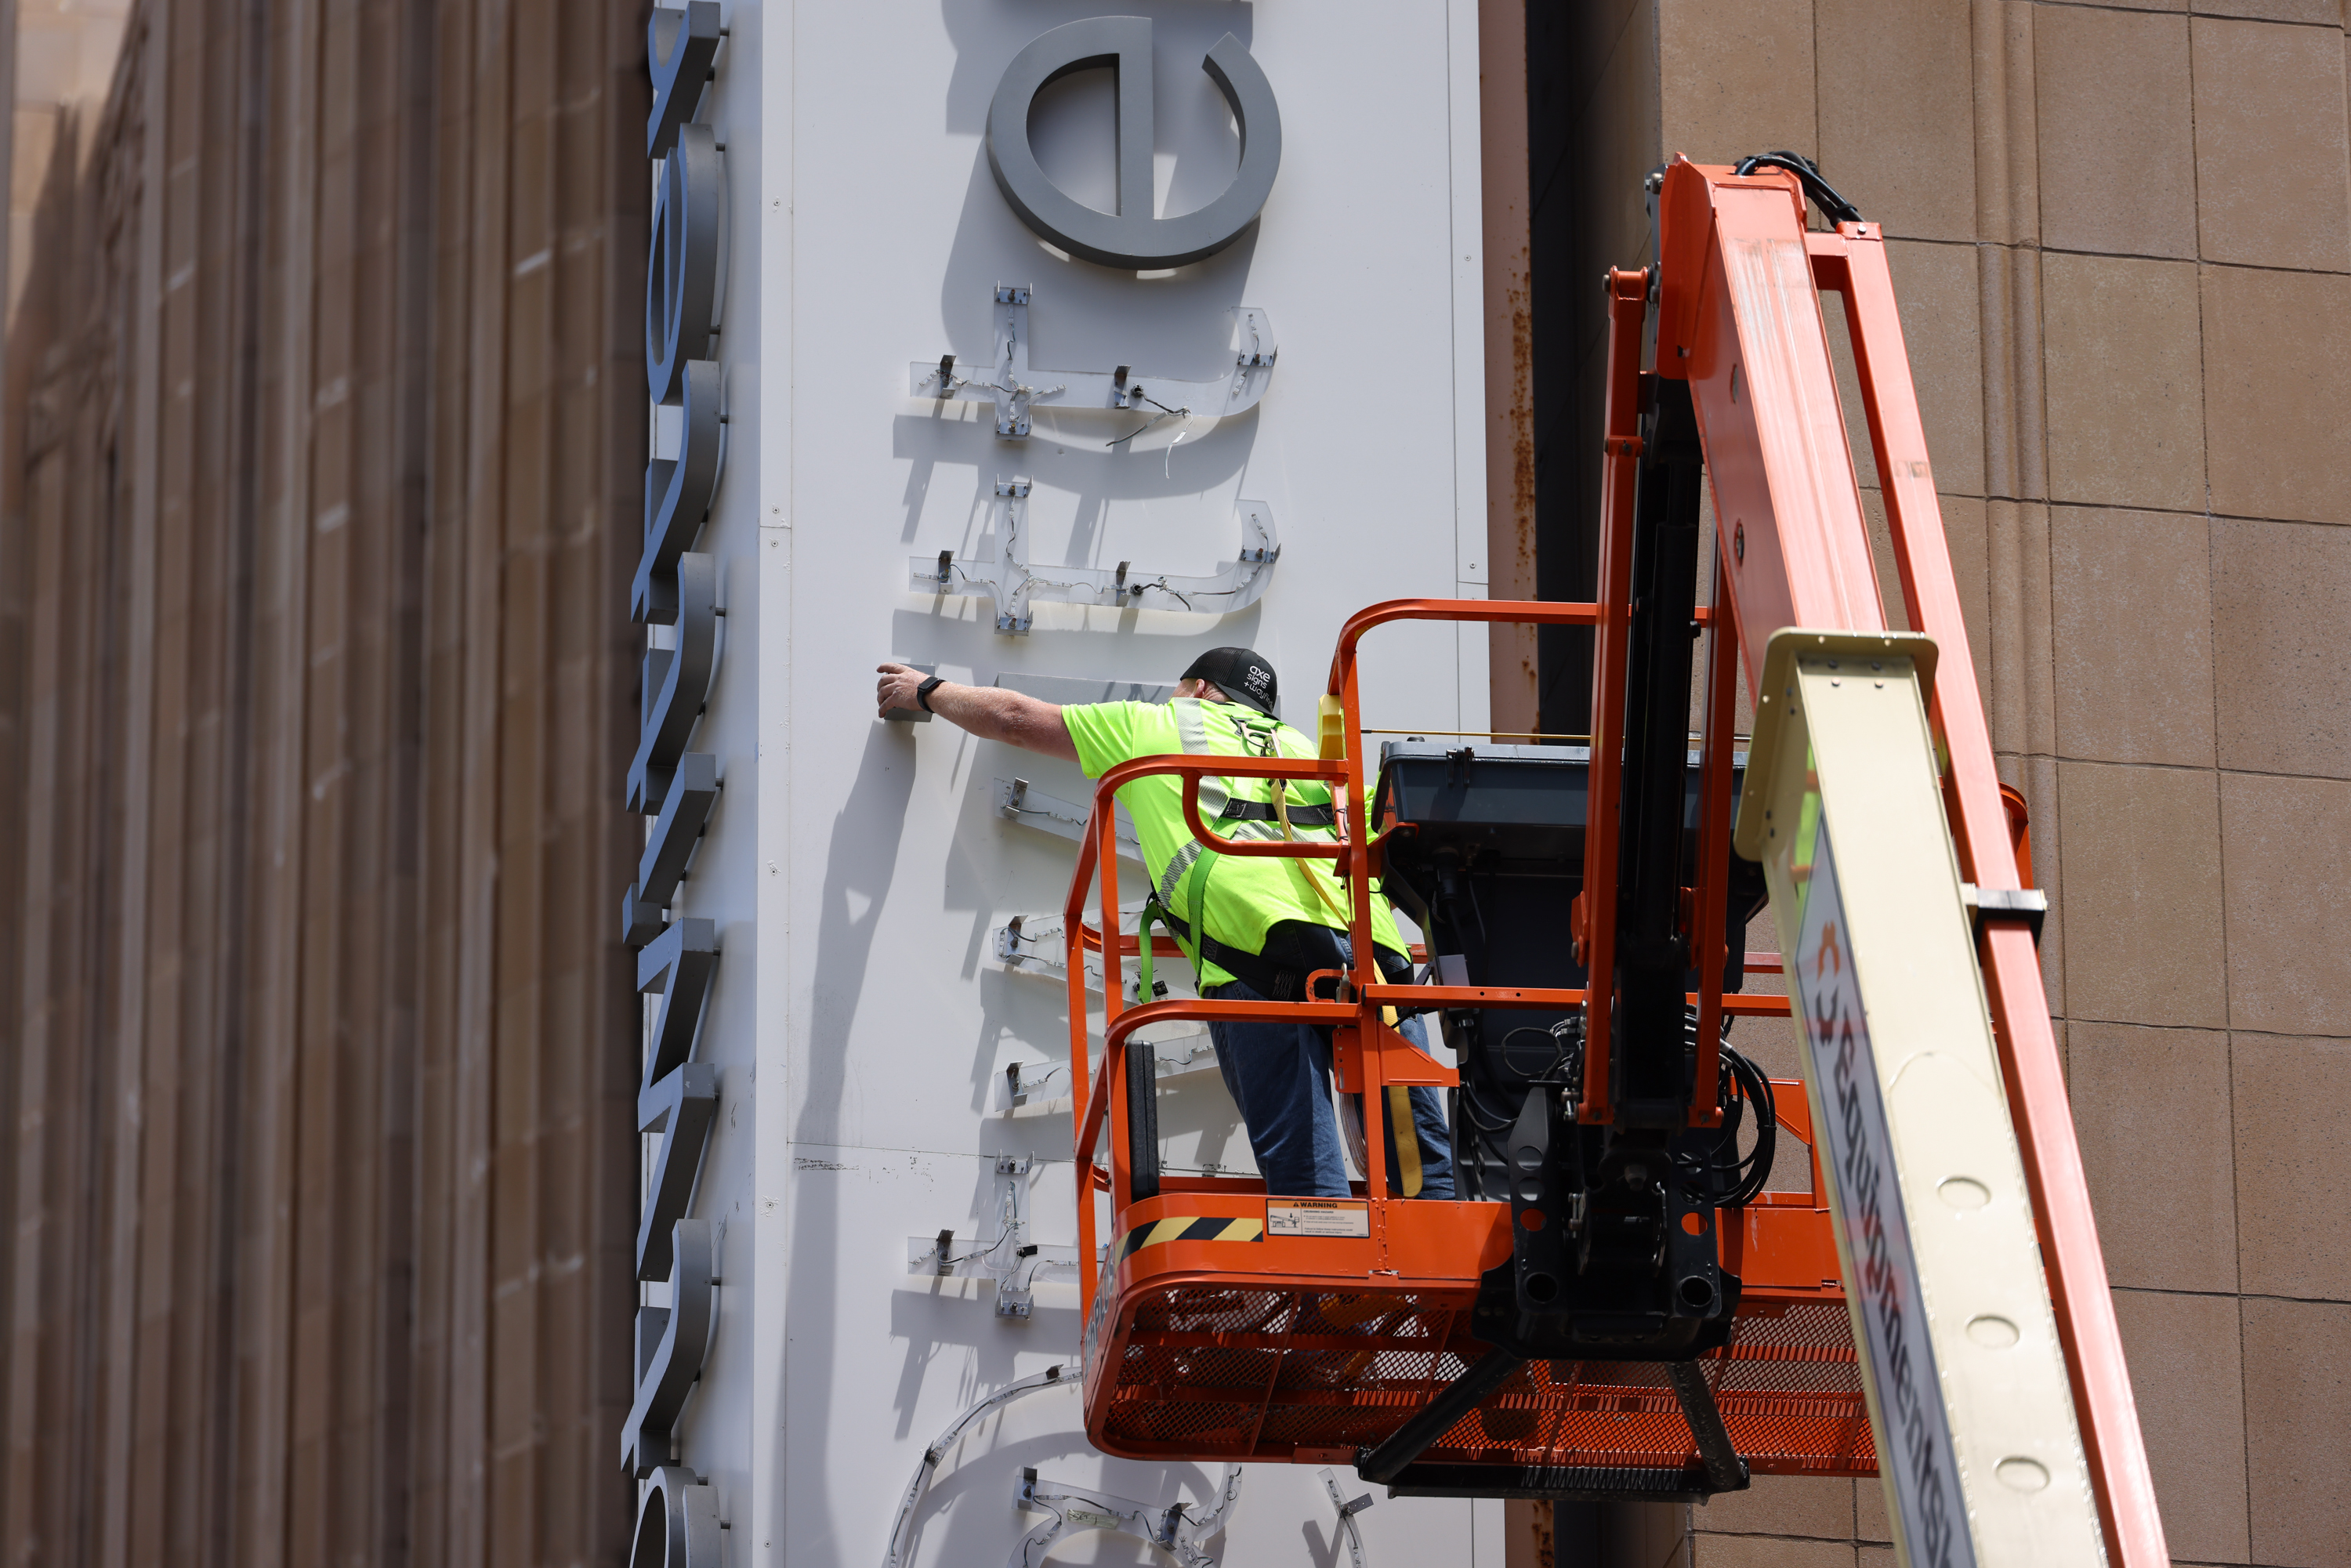 A person in a high visibility vest works on building signage from an orange aerial lift.